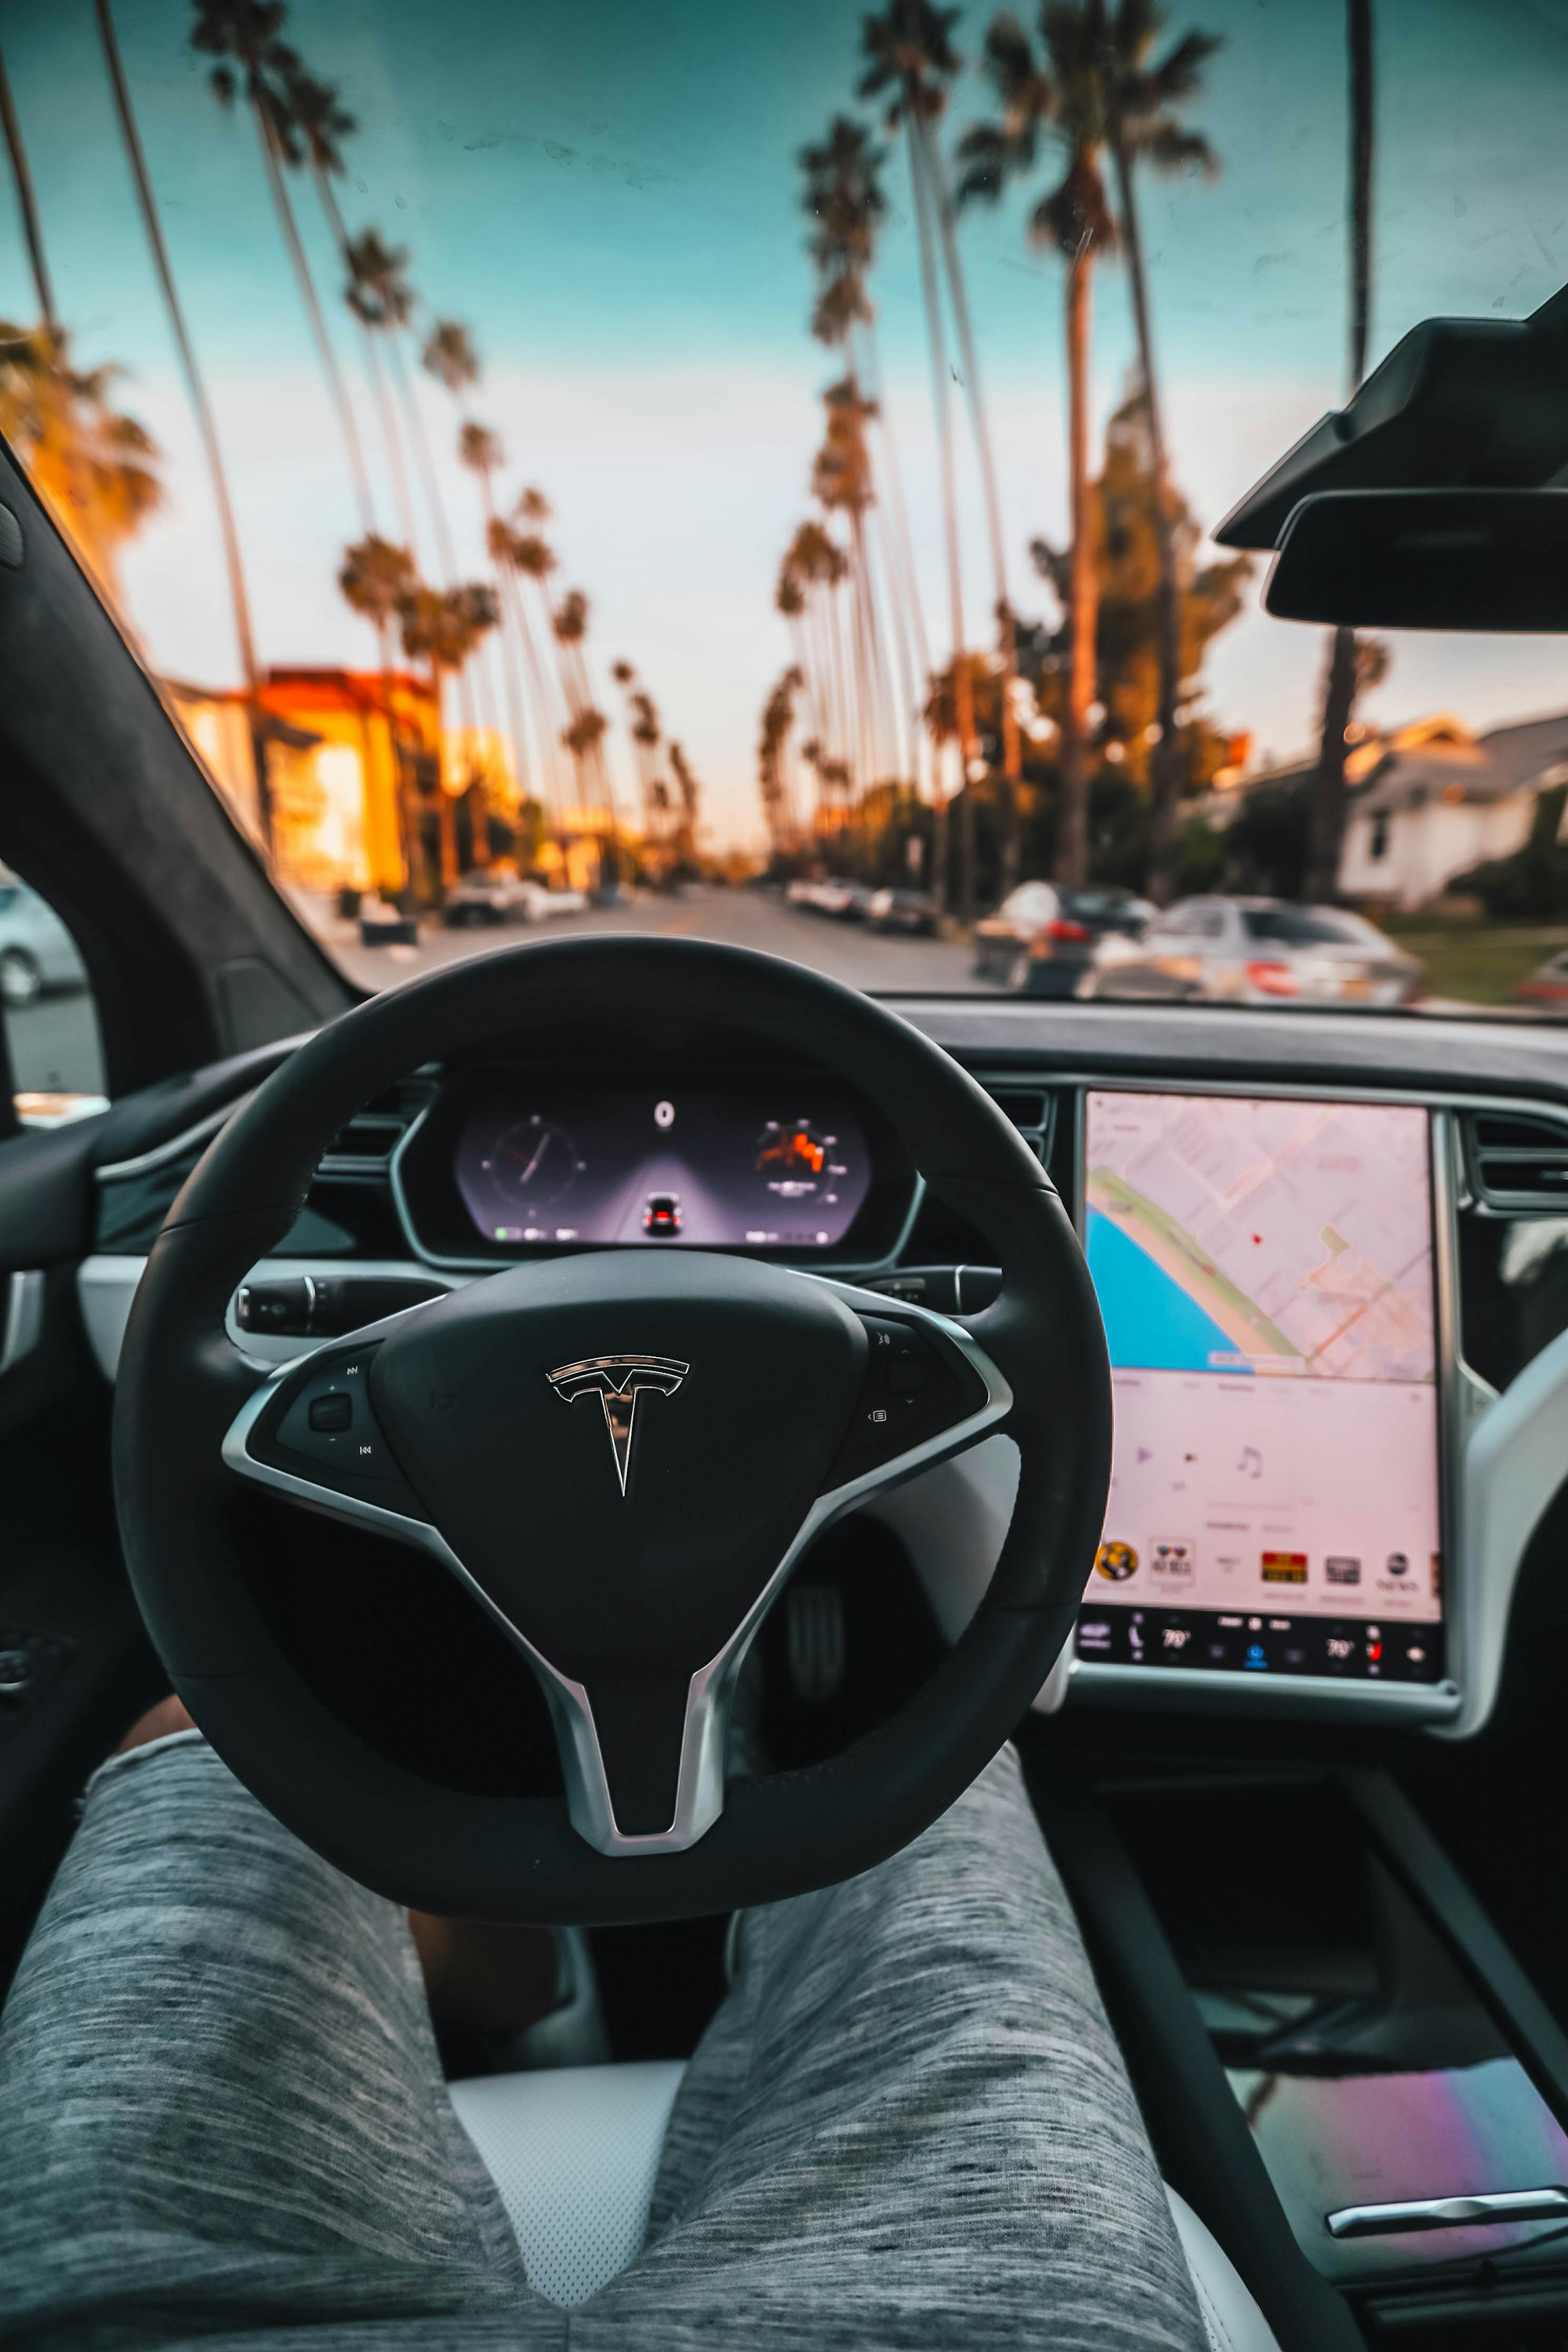 Tesla P100D Cockpit.

If you find my photos useful, please consider subscribing to me on YouTube for the occasional photography tutorial and much more - https://bit.ly/3smVlKp 